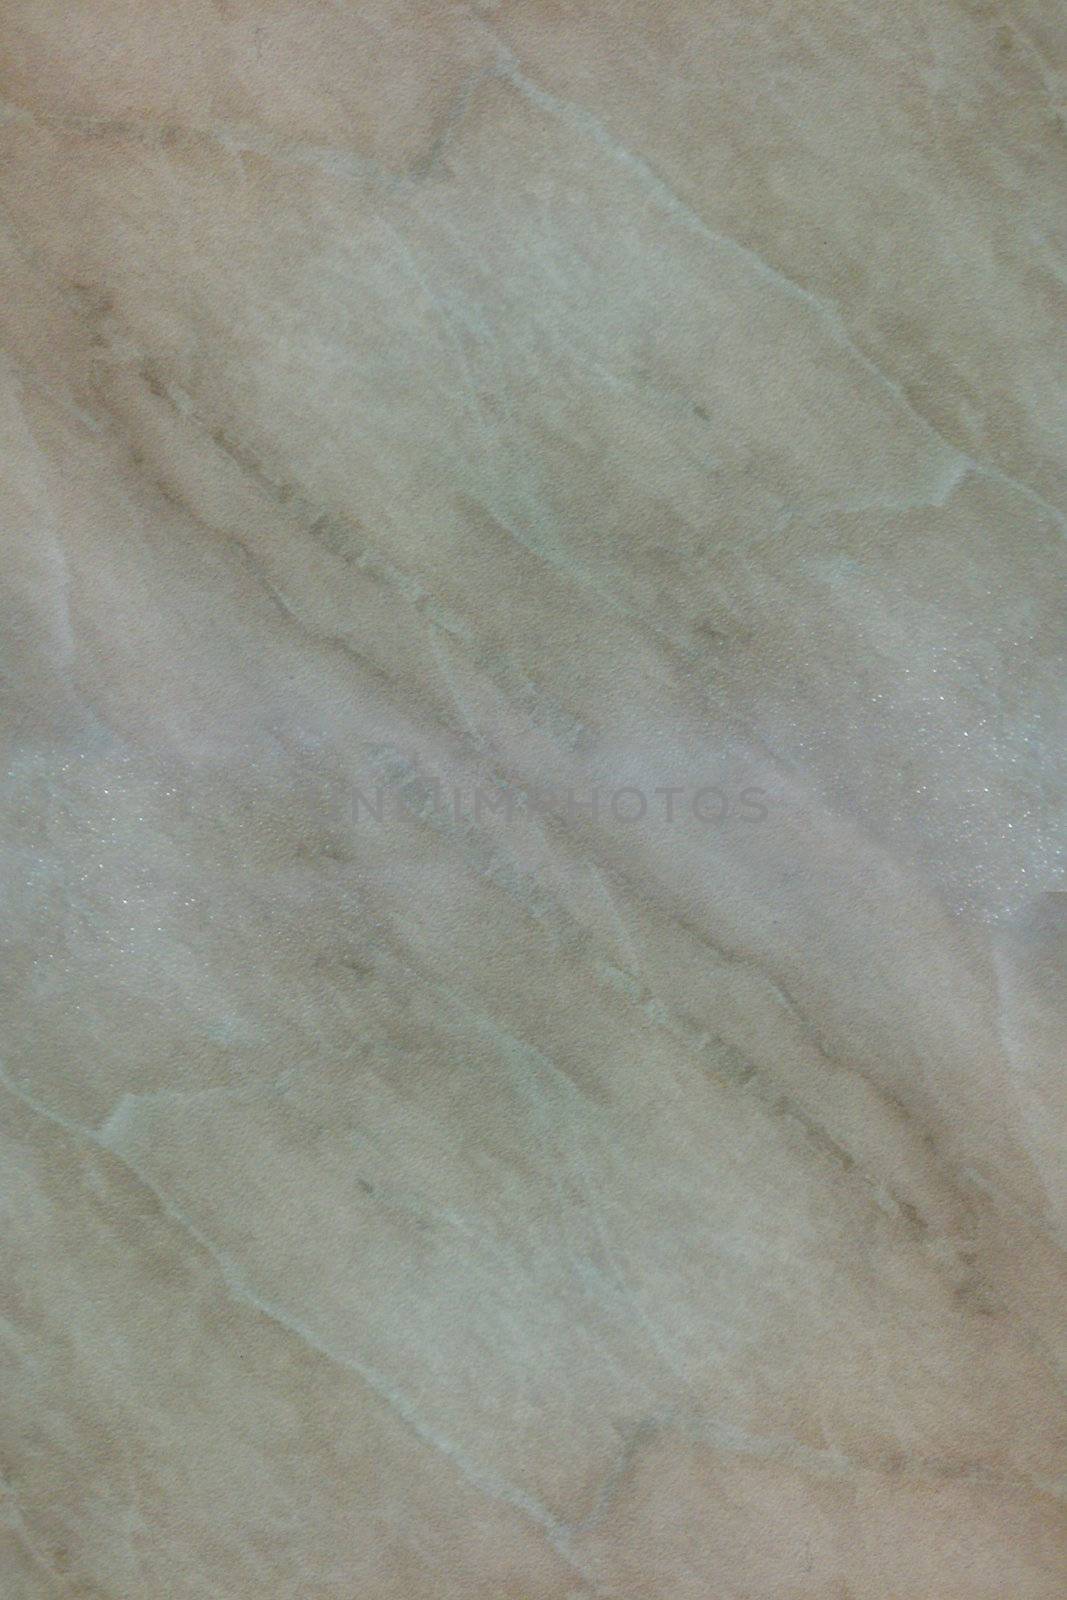 highly detailed image of marble texture
